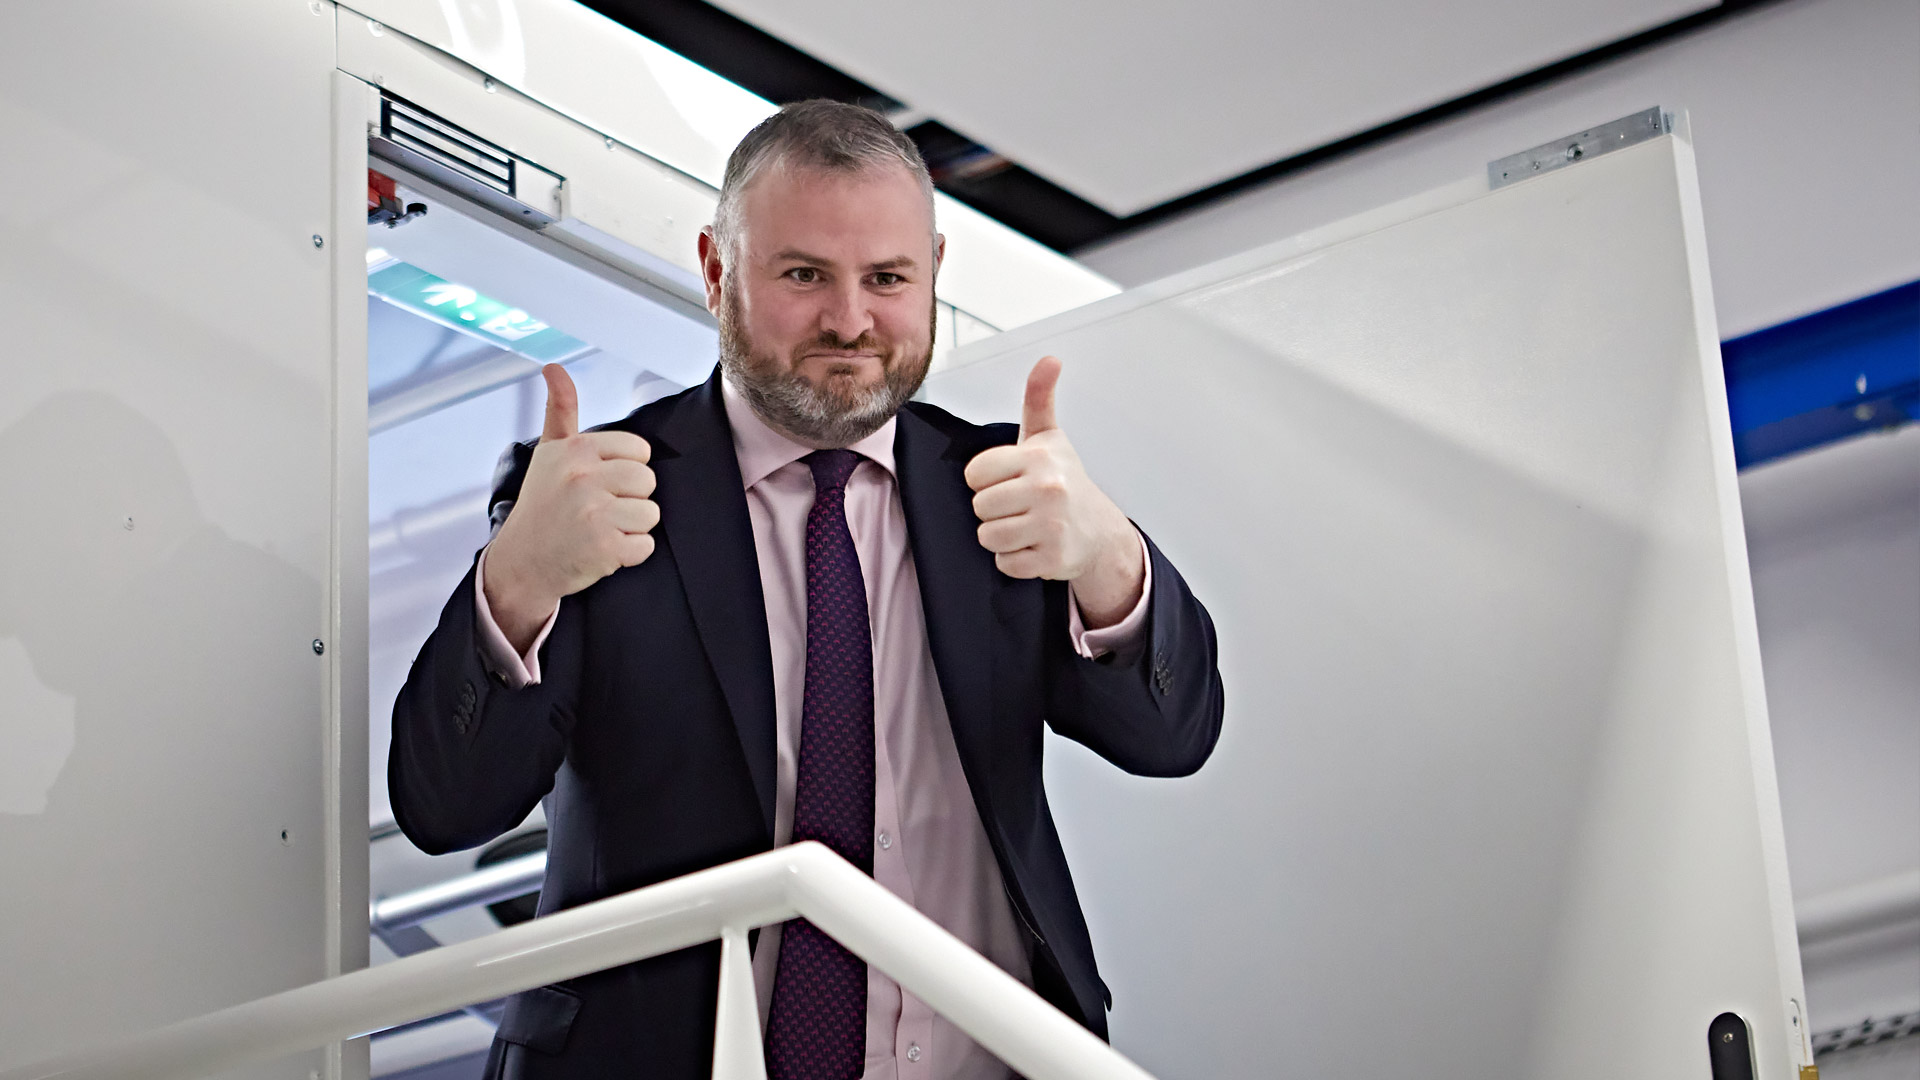 Andrew Stephenson MP gives the thumbs up after his experience on THOMoS, the motion platform-based laboratory simulator